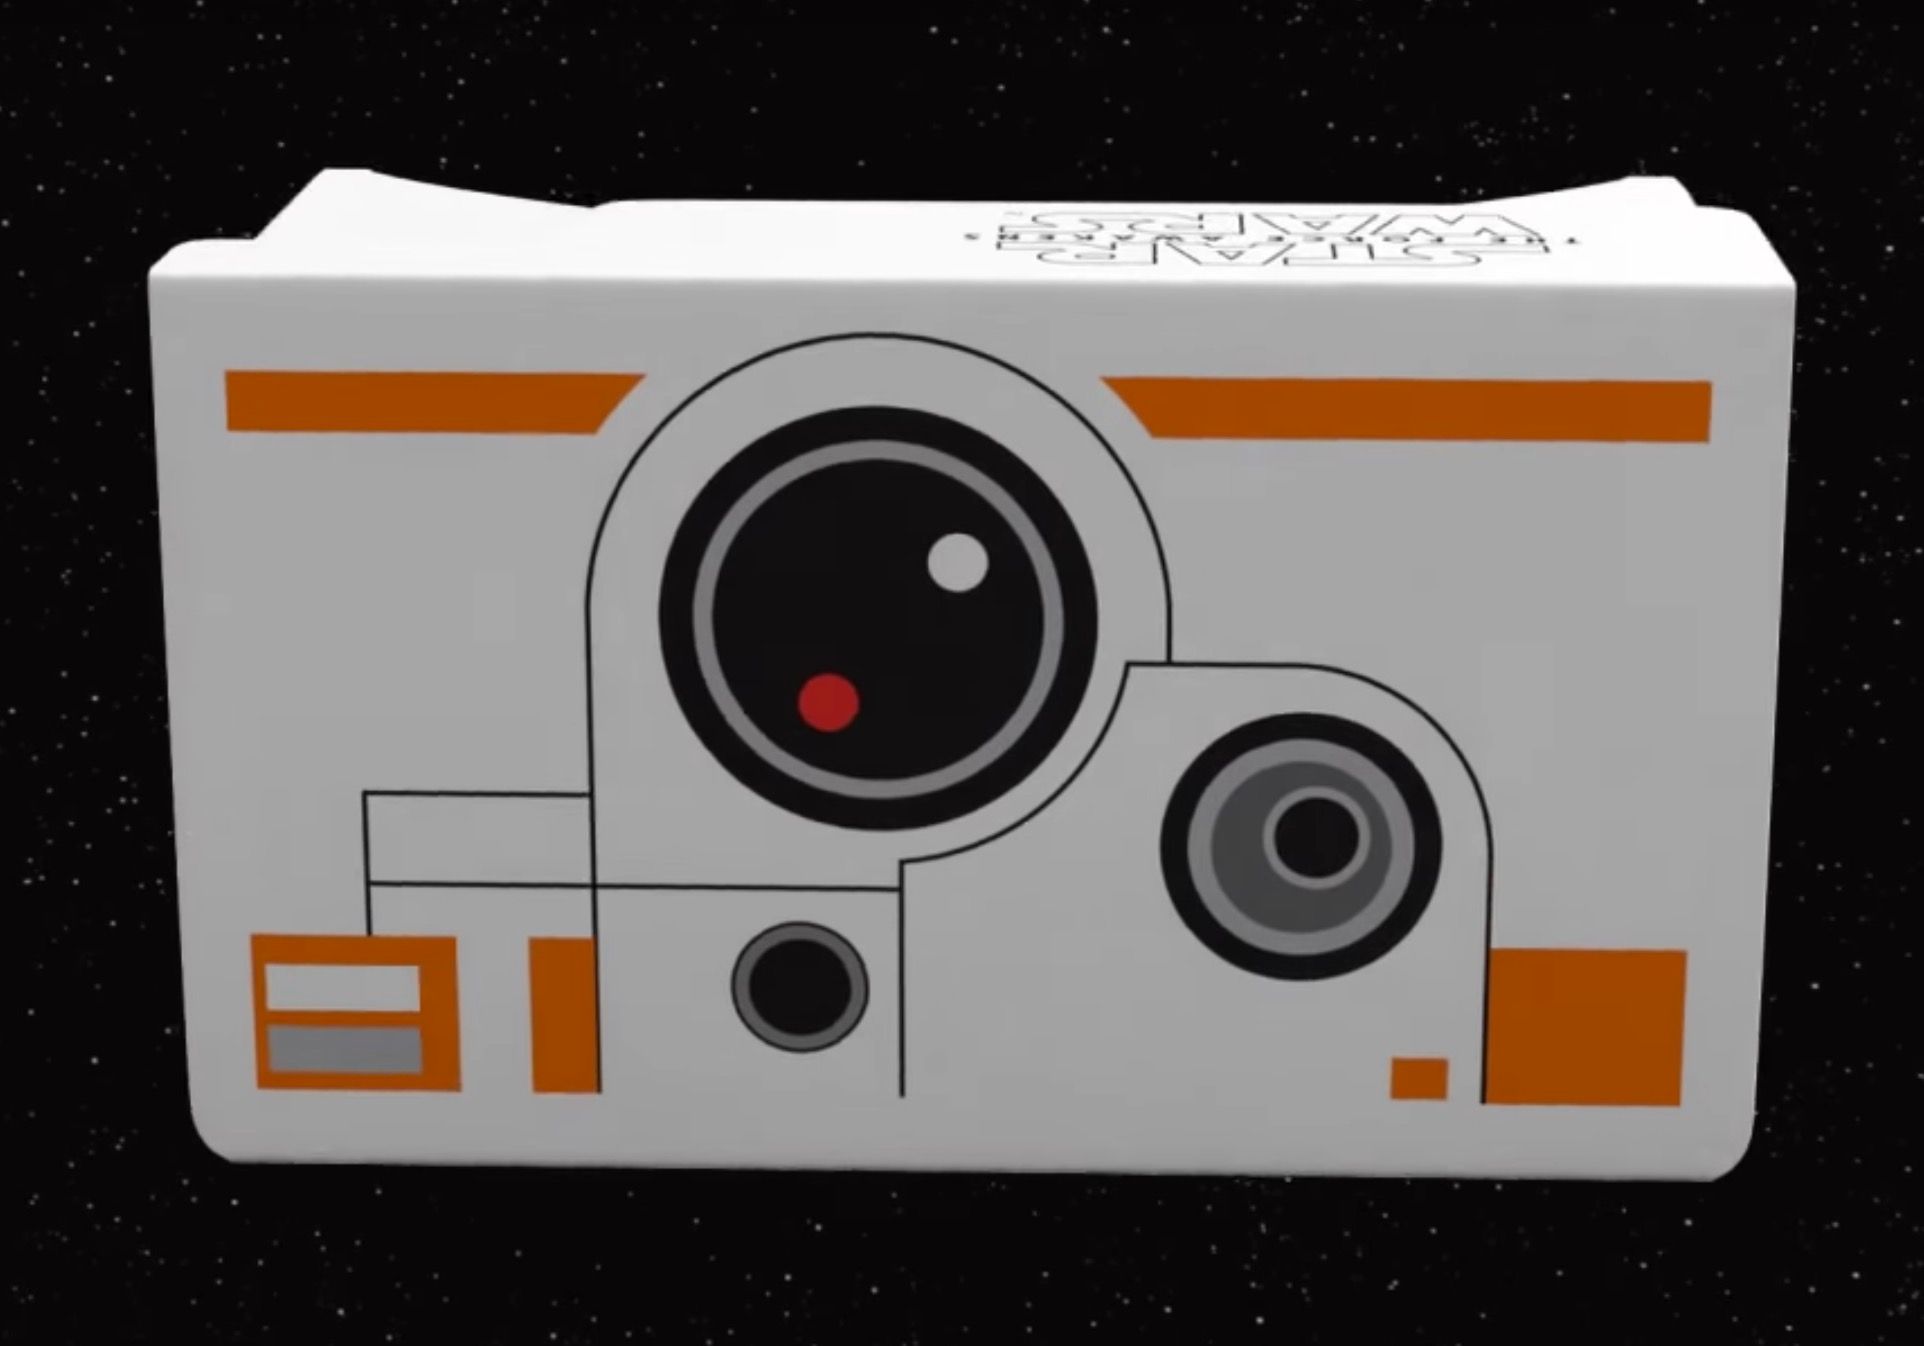 star wars themed vr experience for google cardboard is now out image 1